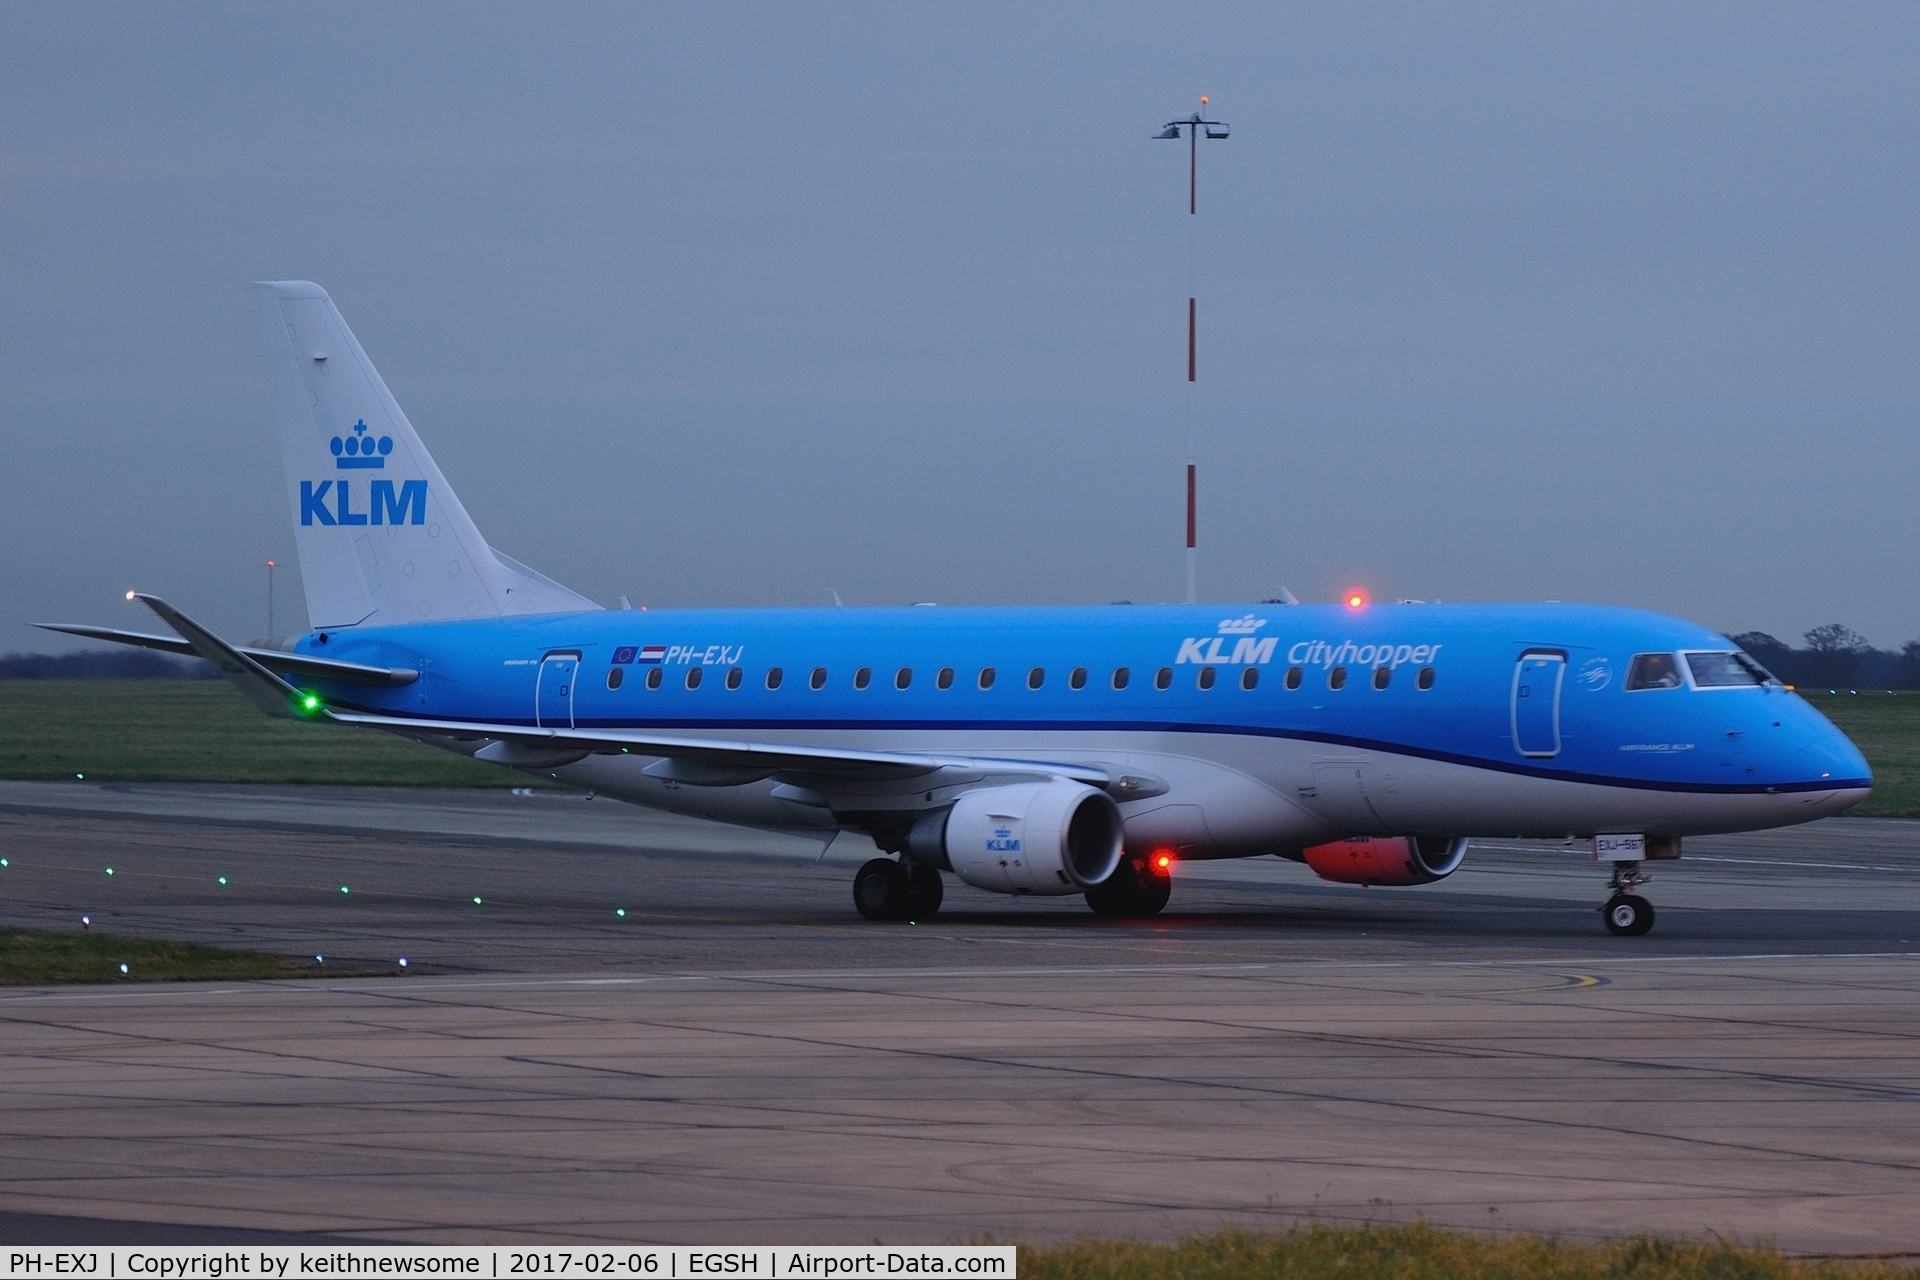 PH-EXJ, 2016 Embraer 175LR (ERJ-170-200LR) C/N 17000597, First visit to Norwich of a KLM E170.